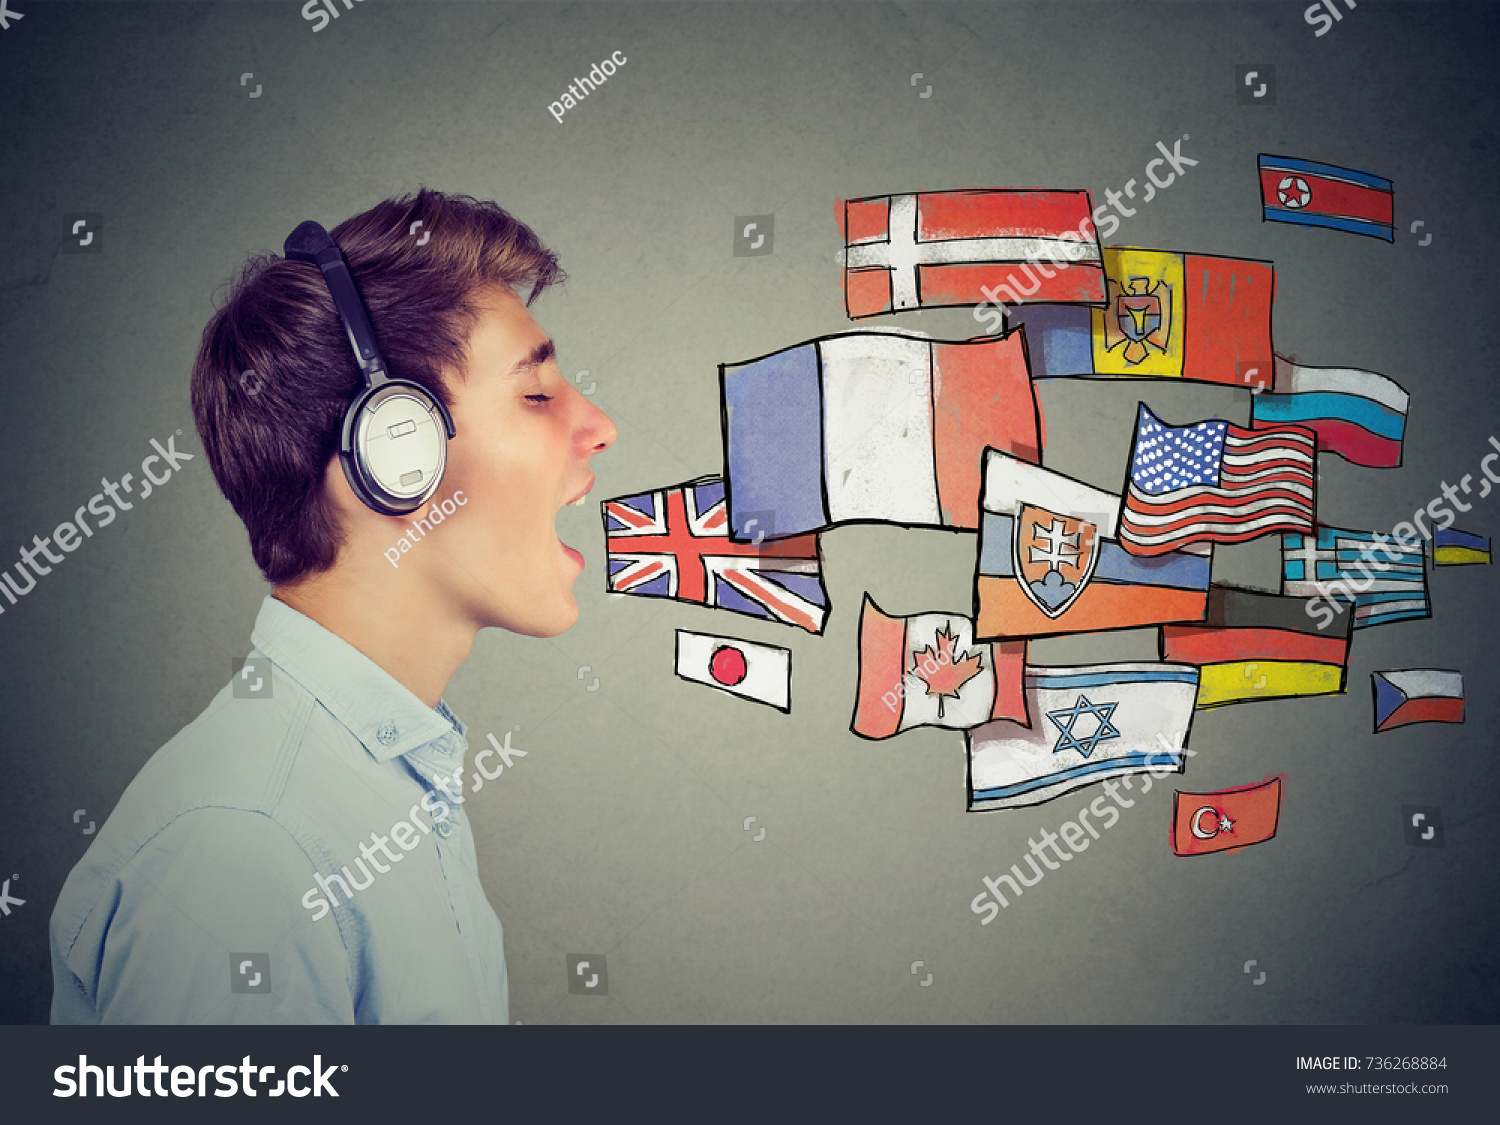 Young man learning different languages #736268884